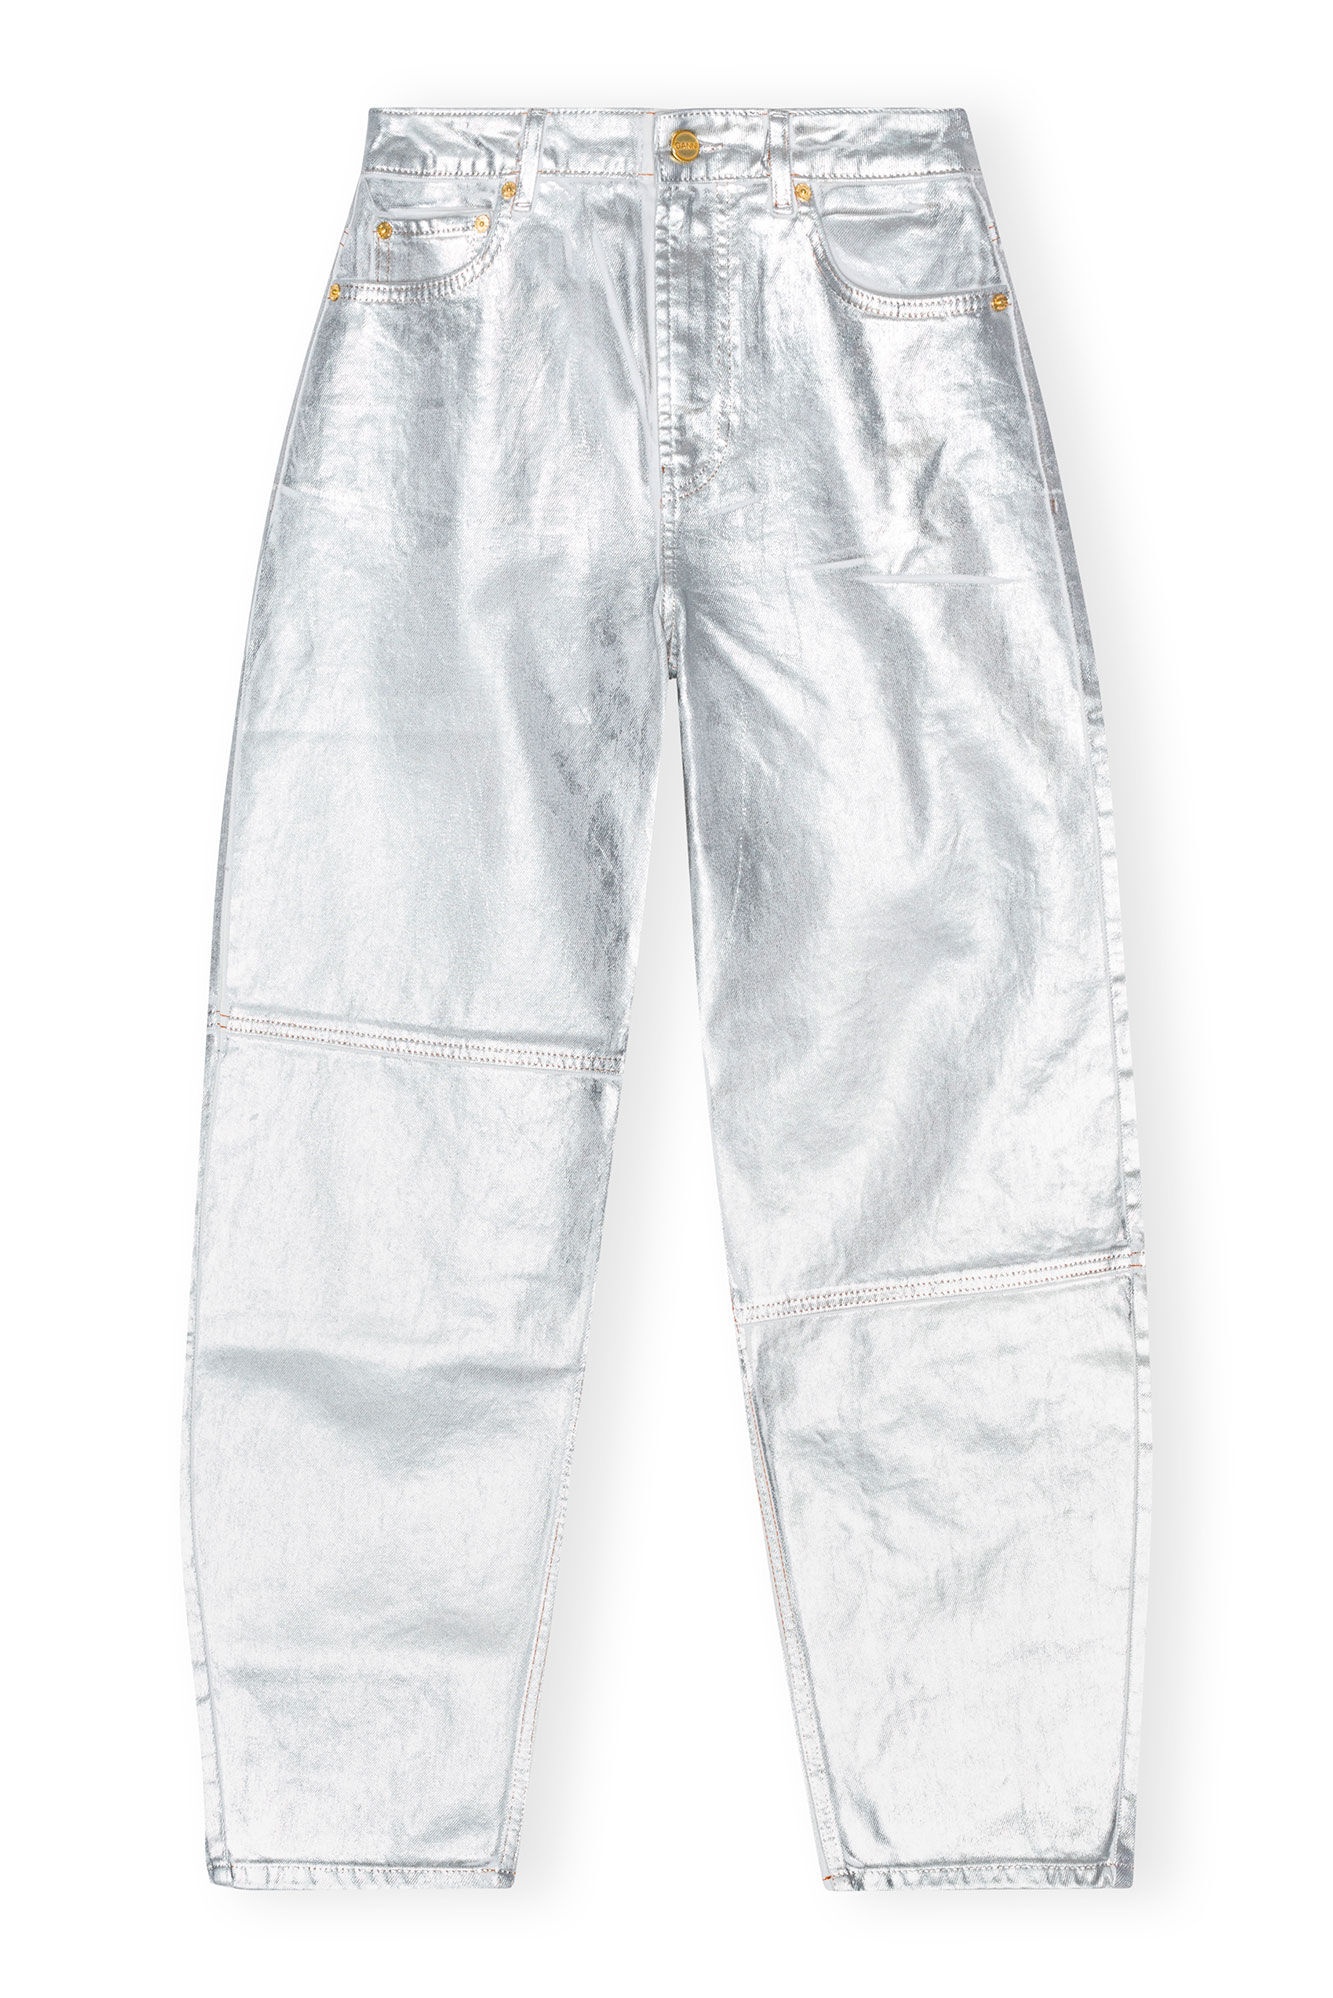 SILVER FOIL STARY JEANS - 1